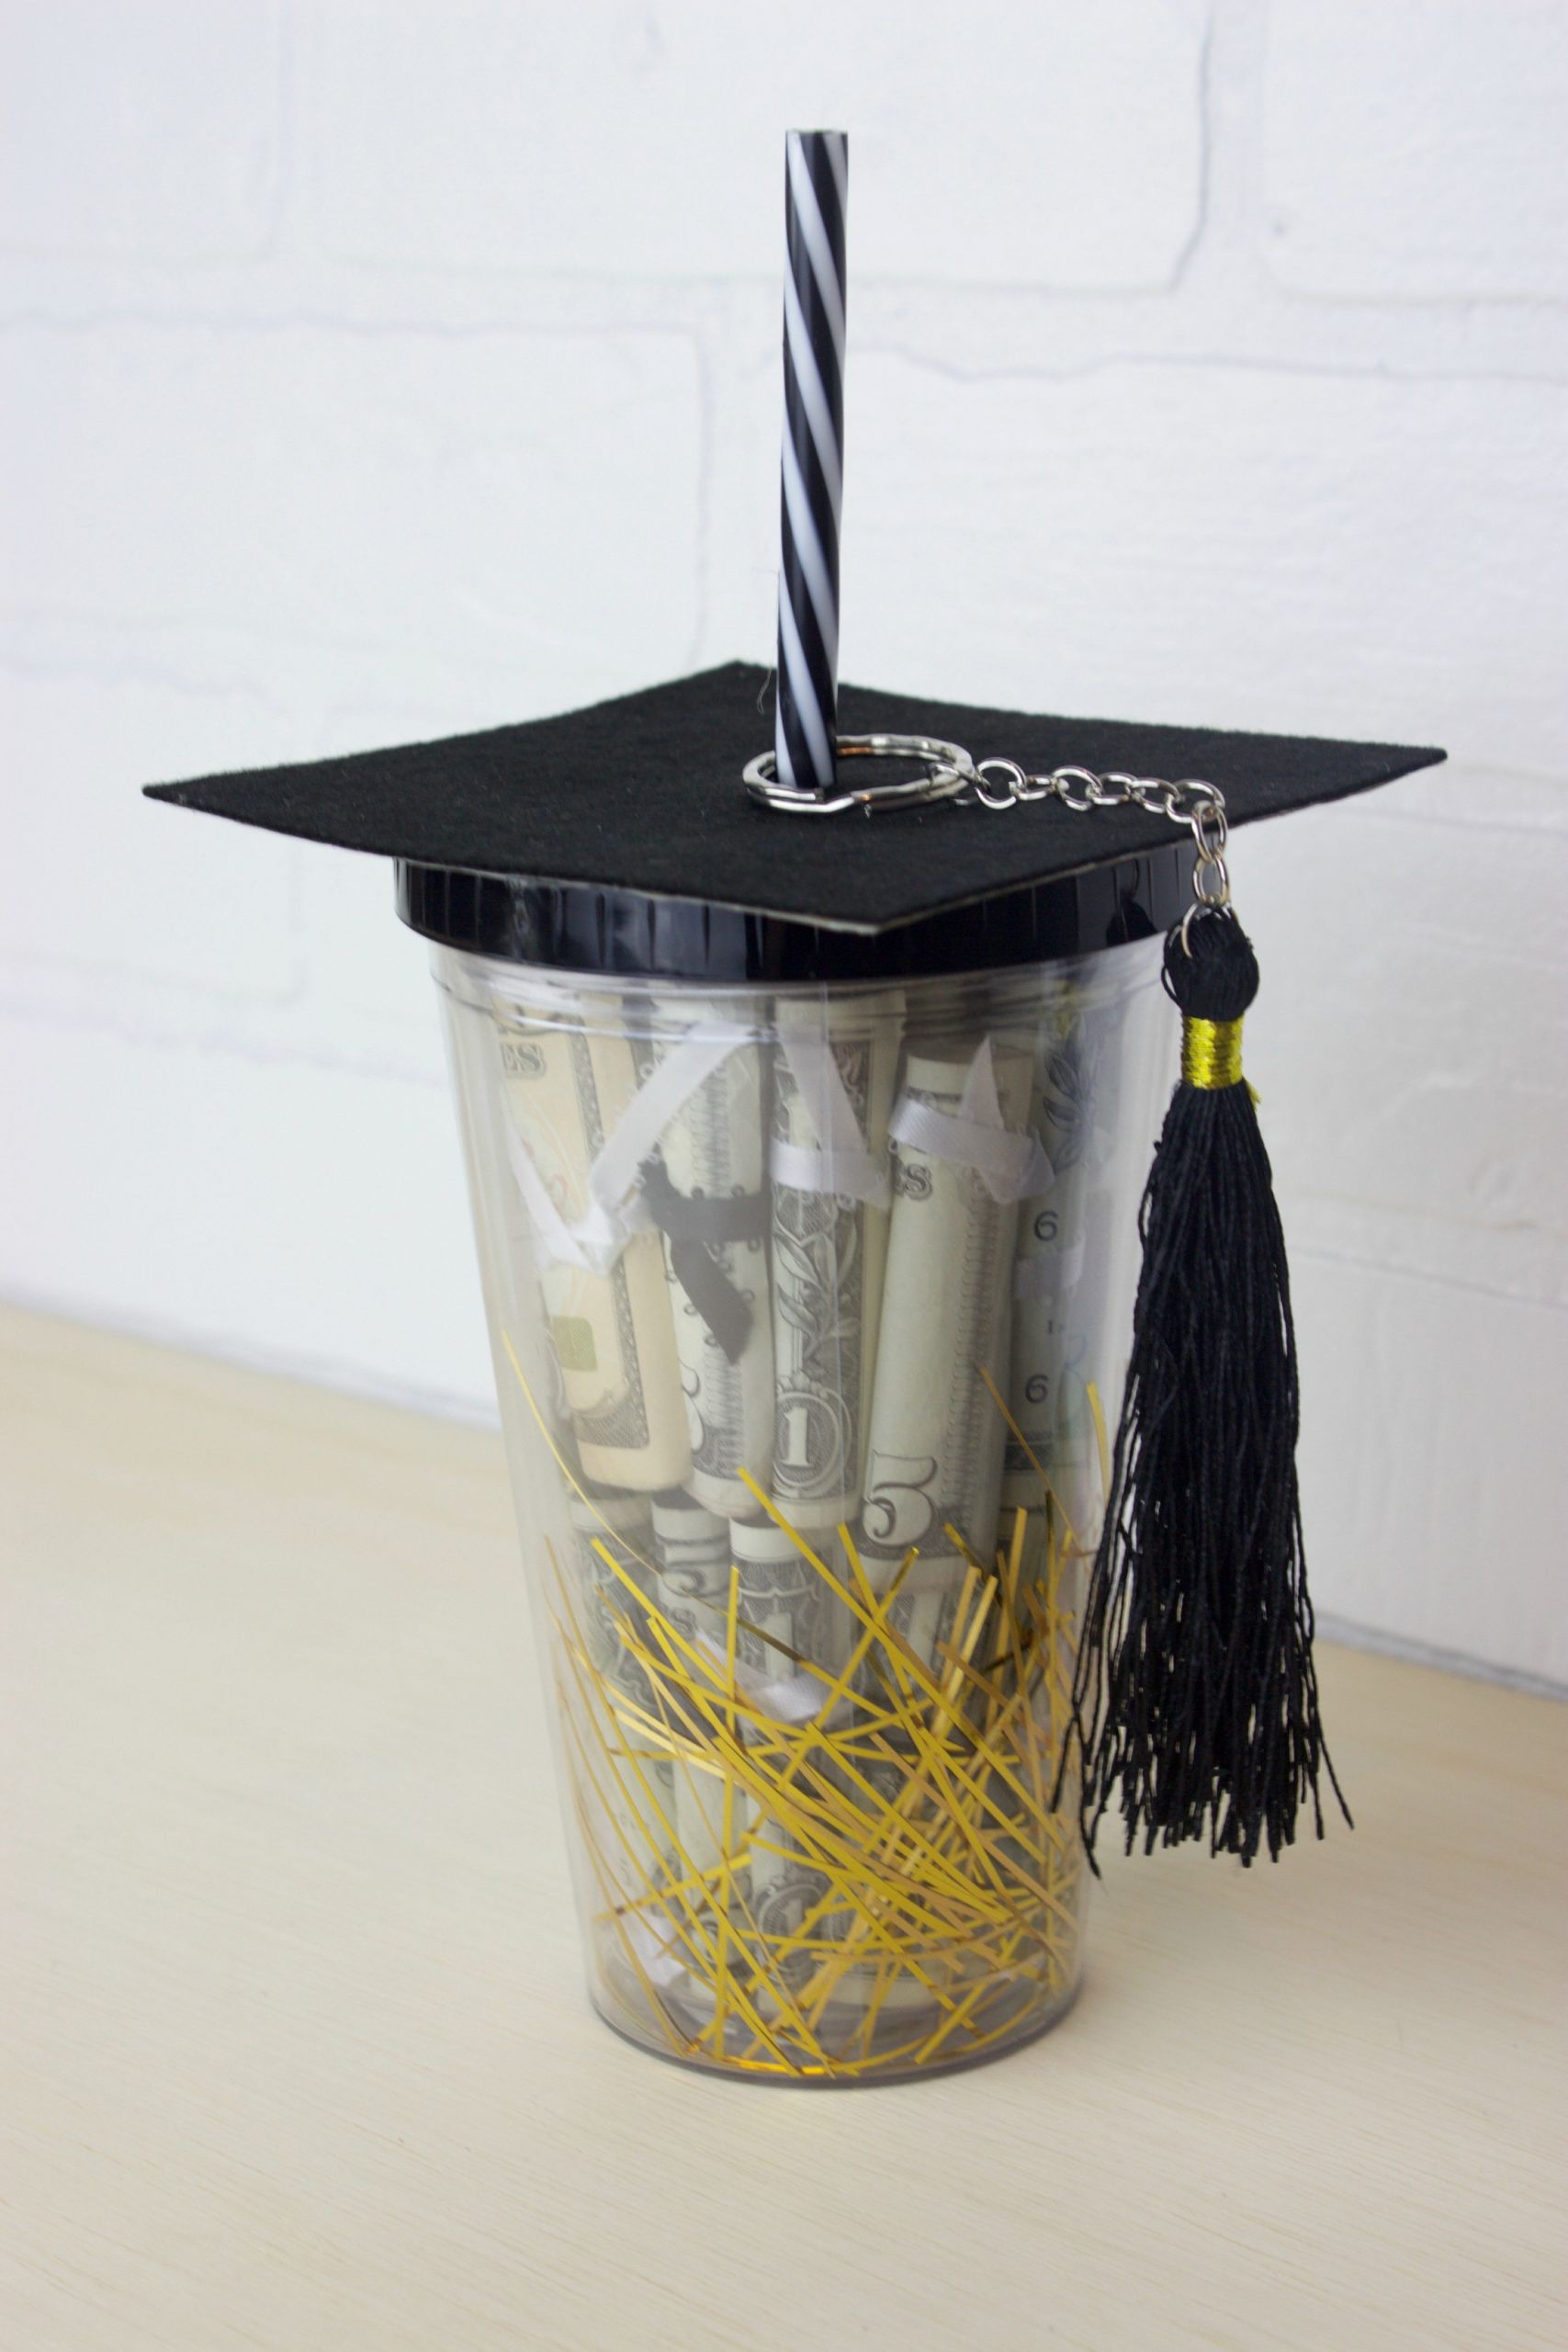 Homemade Graduation Gift Ideas
 DIY Graduation Gift in a Cup